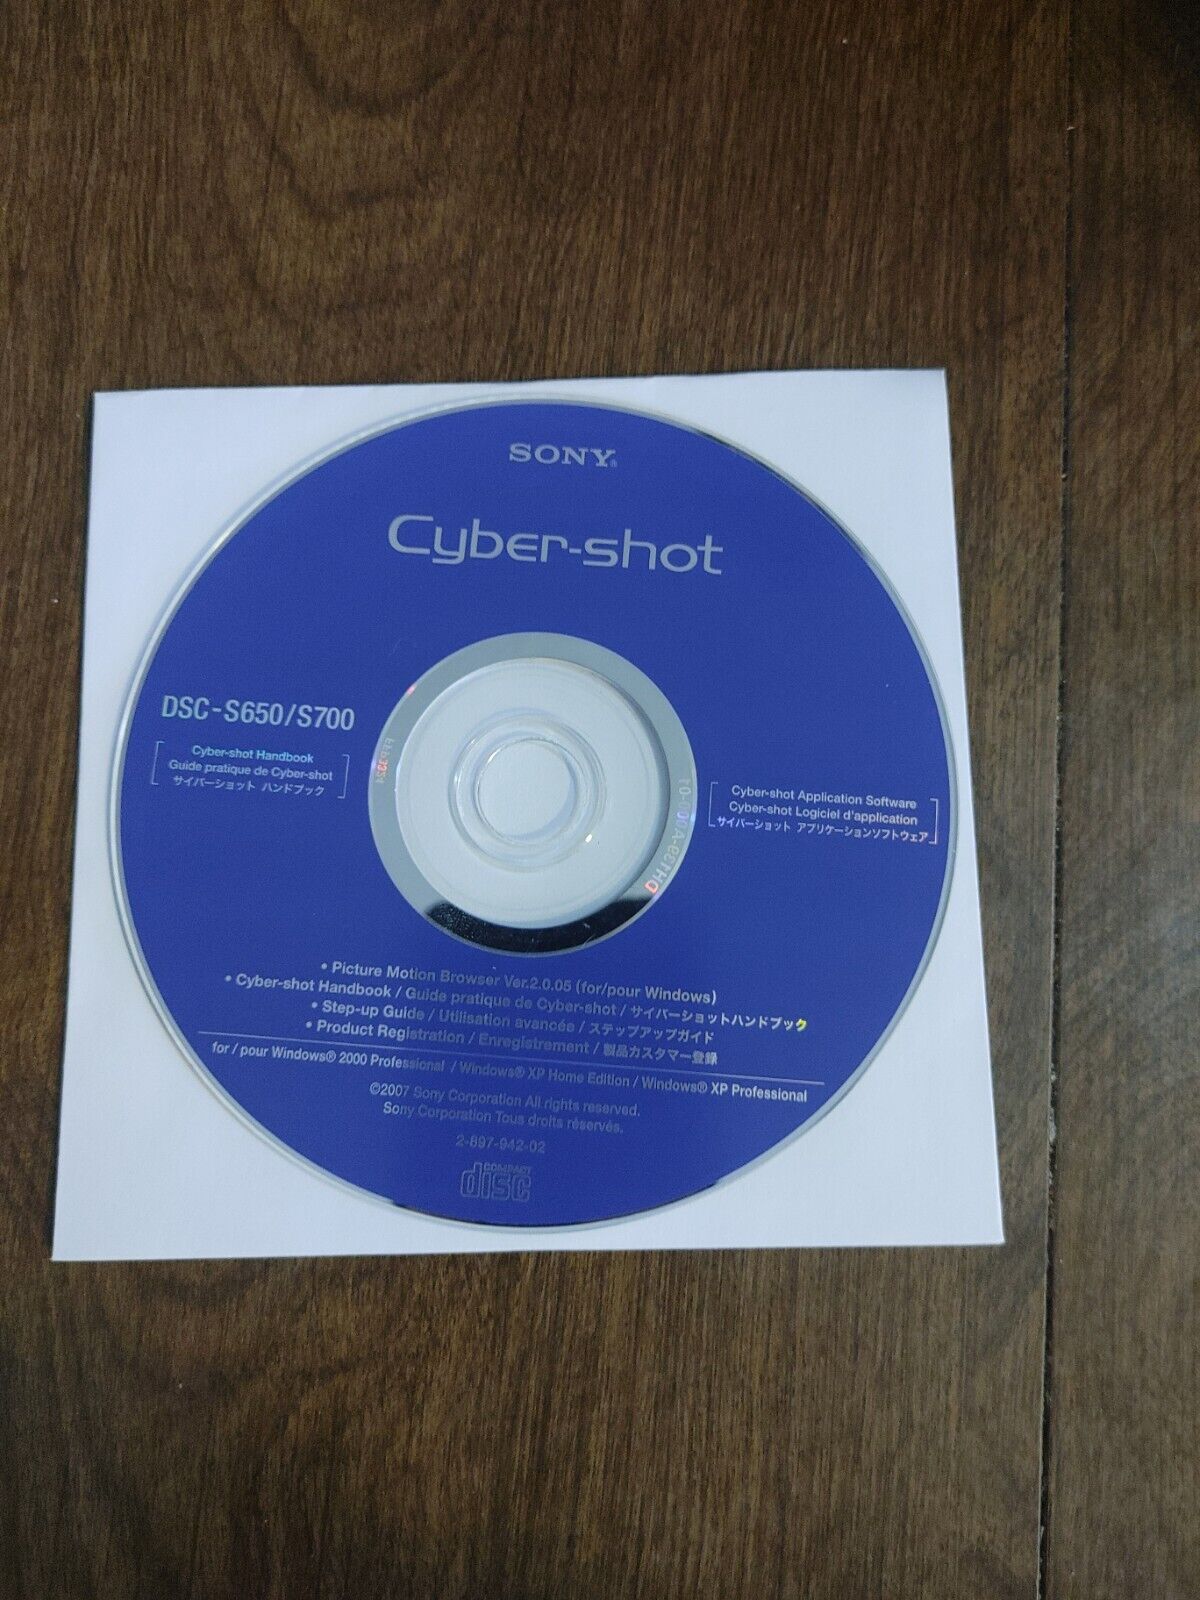 Sony Cyber-shot Software Disc CD-Rom Ver. 1.0 by Sony for WIN 2000 / XP ~ 2006